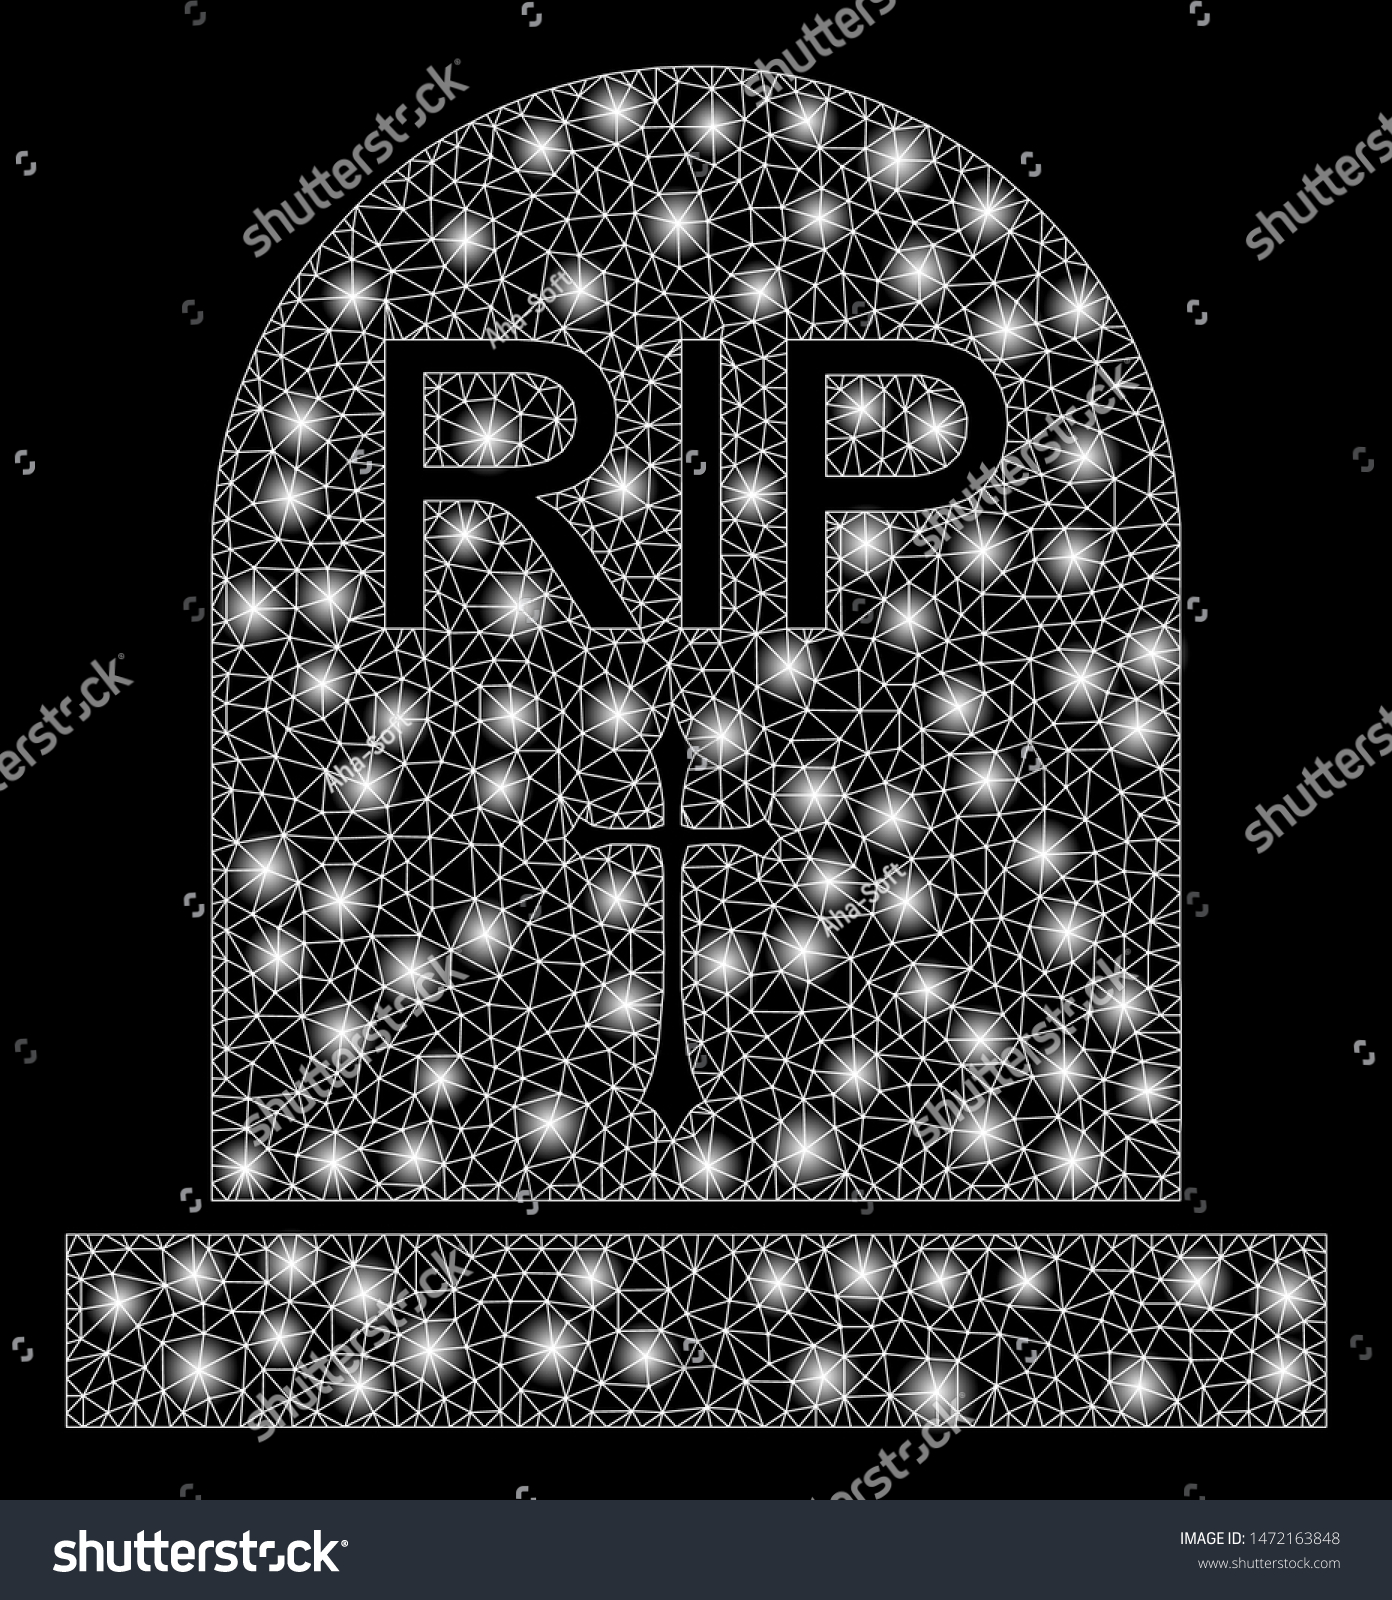 stock-vector-flare-mesh-rip-with-glitter-effect-abstract-illuminated-model-of-rip-icon-shiny-wire-frame-1472163848.jpg